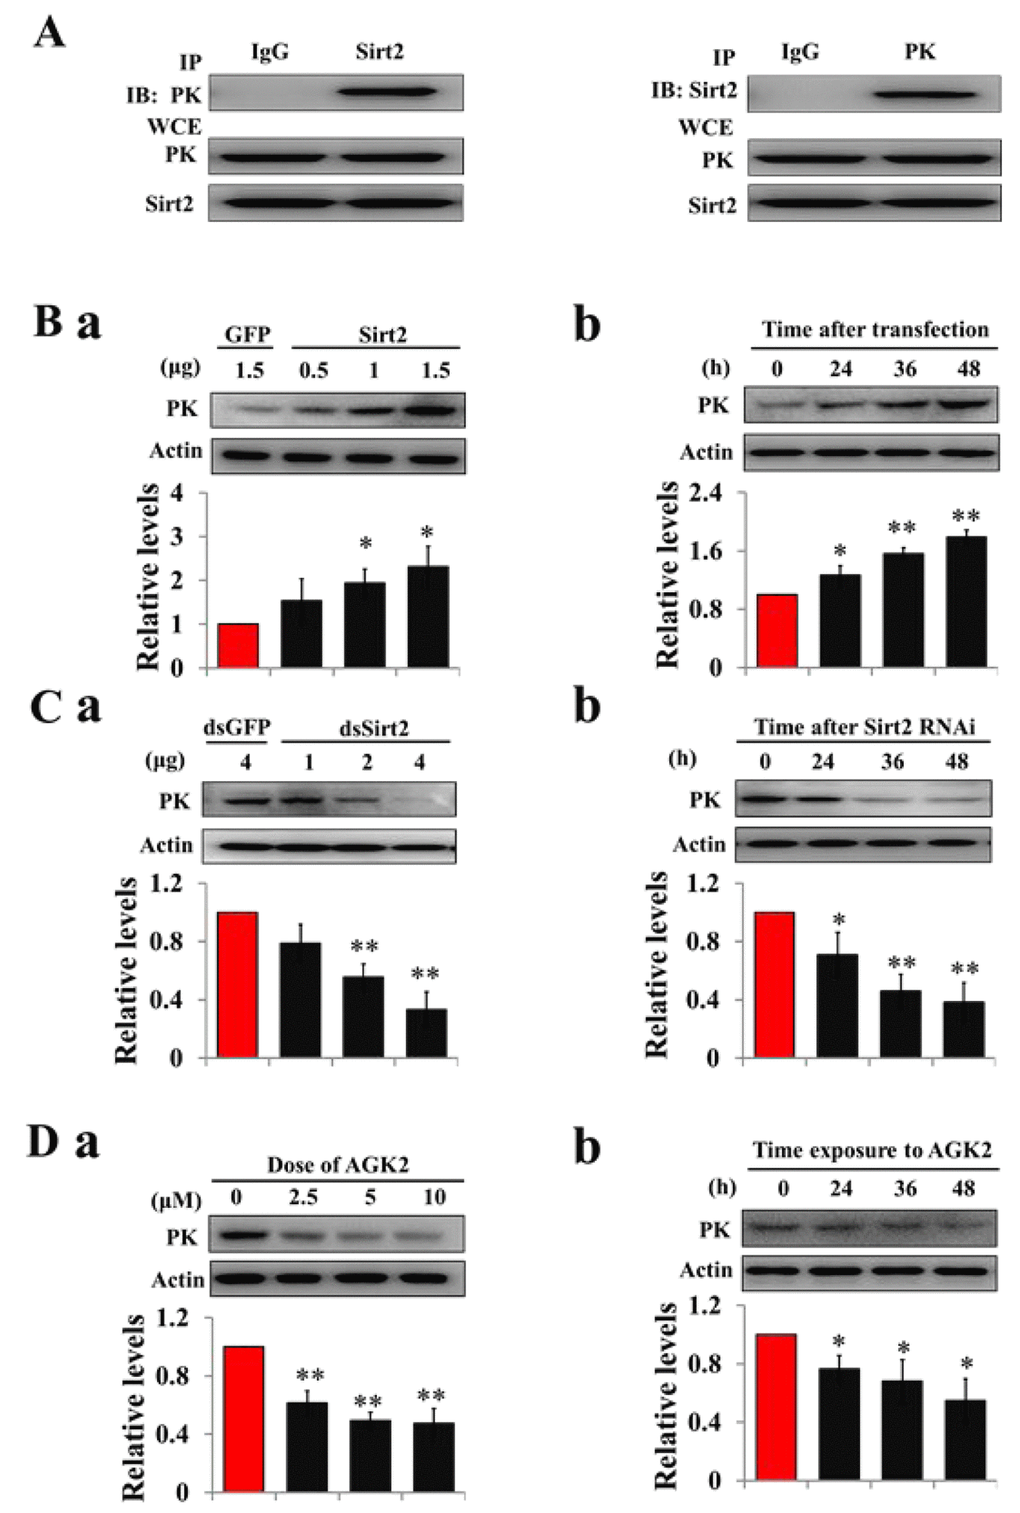 Sirt2 interacts with and increases PK protein levels. (A) Sirt2 physically interacts with PK. HzAm1 cells were co-transfected with GFP-Sirt2 and GFP-PK-V5 plasmid for 48 h, and then the cell extracts were immunoprecipitated (IP) with anti-V5 or anti-Sirt2 antibody, followed by immunoblotting (IB) with anti-Sirt2 or anti-V5 antibody, respectively. WCE: whole cell extracts. (B) Sirt2 transfection increases endogenous PK protein levels in vitro. (a) Dose-dependent response to Sirt2 transfection. HzAm1 cells were transfected with GFP-Sirt2 or GFP-V5 plasmid for 48 h. (b) Time-dependent response to Sirt2 transfection. HzAm1 cells were transfected with 1.5 μg Sirt2 plasmid. (C) Sirt2 knockdown decreases endogenous PK protein levels in vitro. (a) Dose-dependent response to Sirt2 RNAi. HzAm cells were transfected with Sirt2 dsRNA or GFP dsRNA for 48 h. (b) Time-dependent response to RNAi. HzAm1 cells were transfected with 4 μg Sirt2 dsRNA. (D) Effects of Sirt2 inhibitor AGK2 on PK protein levels. (a) Dose-dependent response to AGK2 treatment. HzAm1 cells were cultured with AGK2 for 48 h. (b) Time-dependent response to AGK2 treatment. HzAm cells were cultured with 10 μM AGK2. Proteins were extracted from the cells for immunoblotting with anti-PK antibody. Protein bands were quantified using ImageJ software and normalized to the levels of H. armigera actin (5 μg). Each point represents the means±S.D. of three independent replicates. *, p